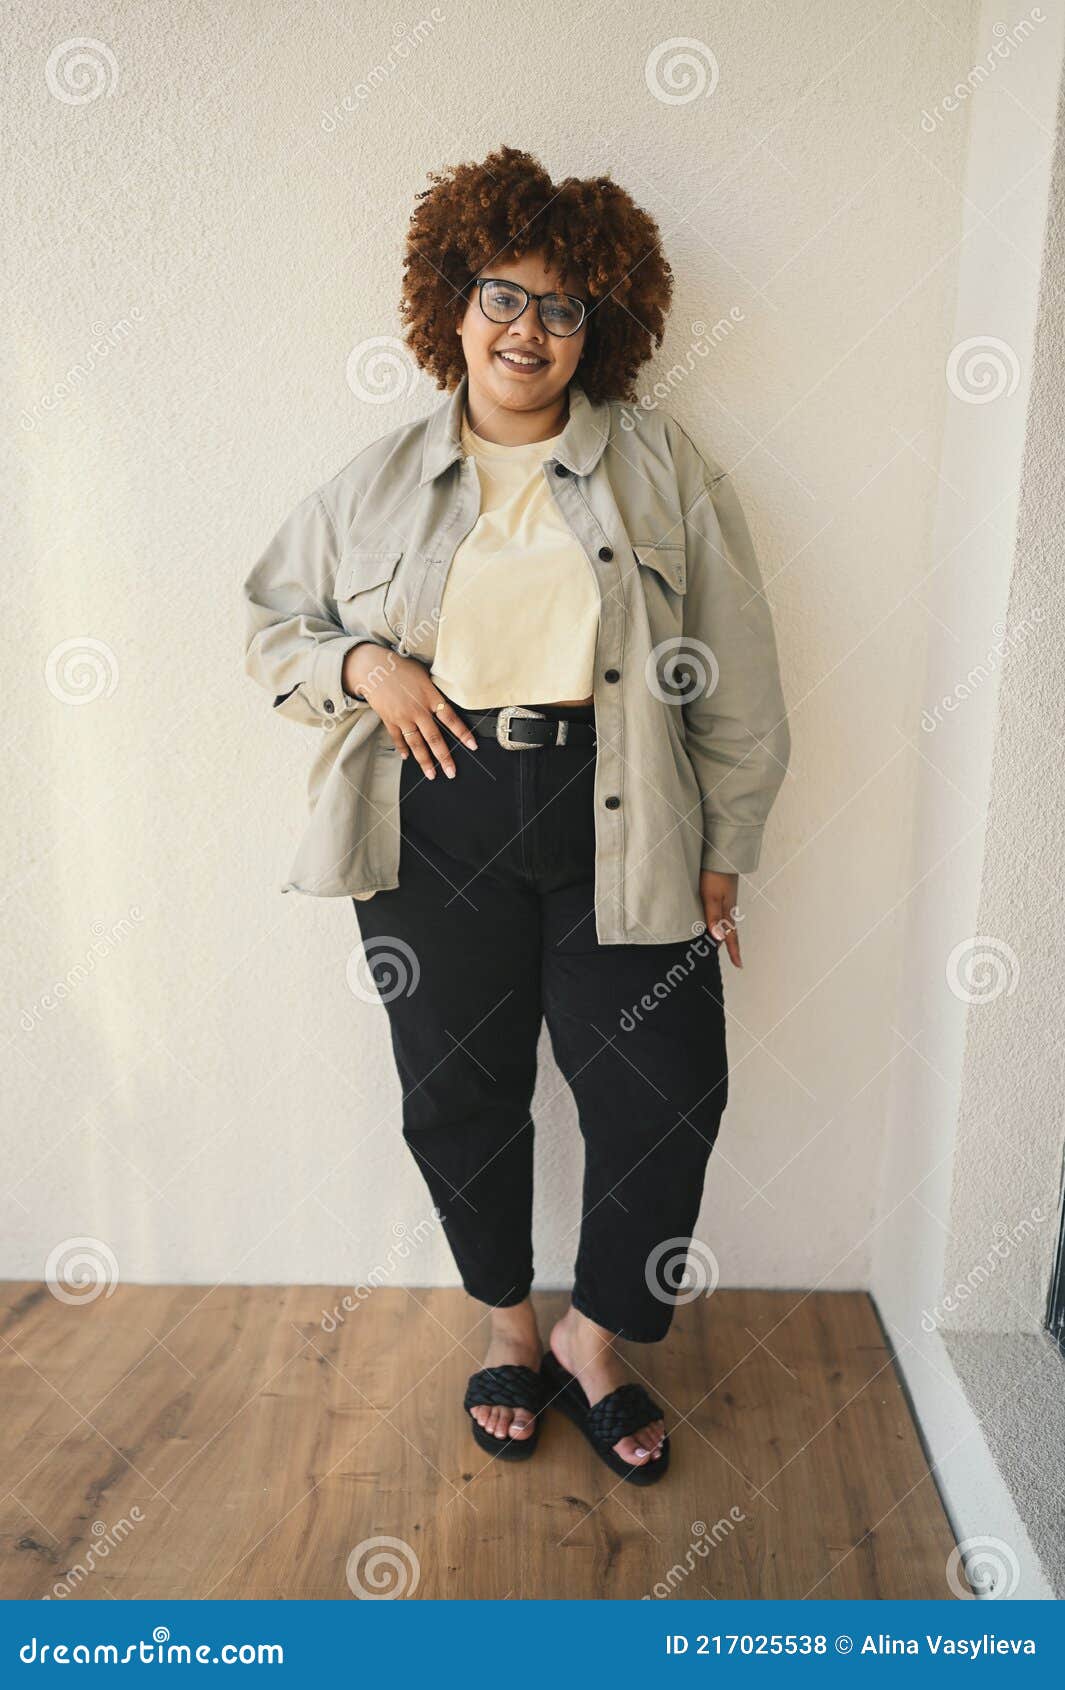 curvy girl with glasses dressing